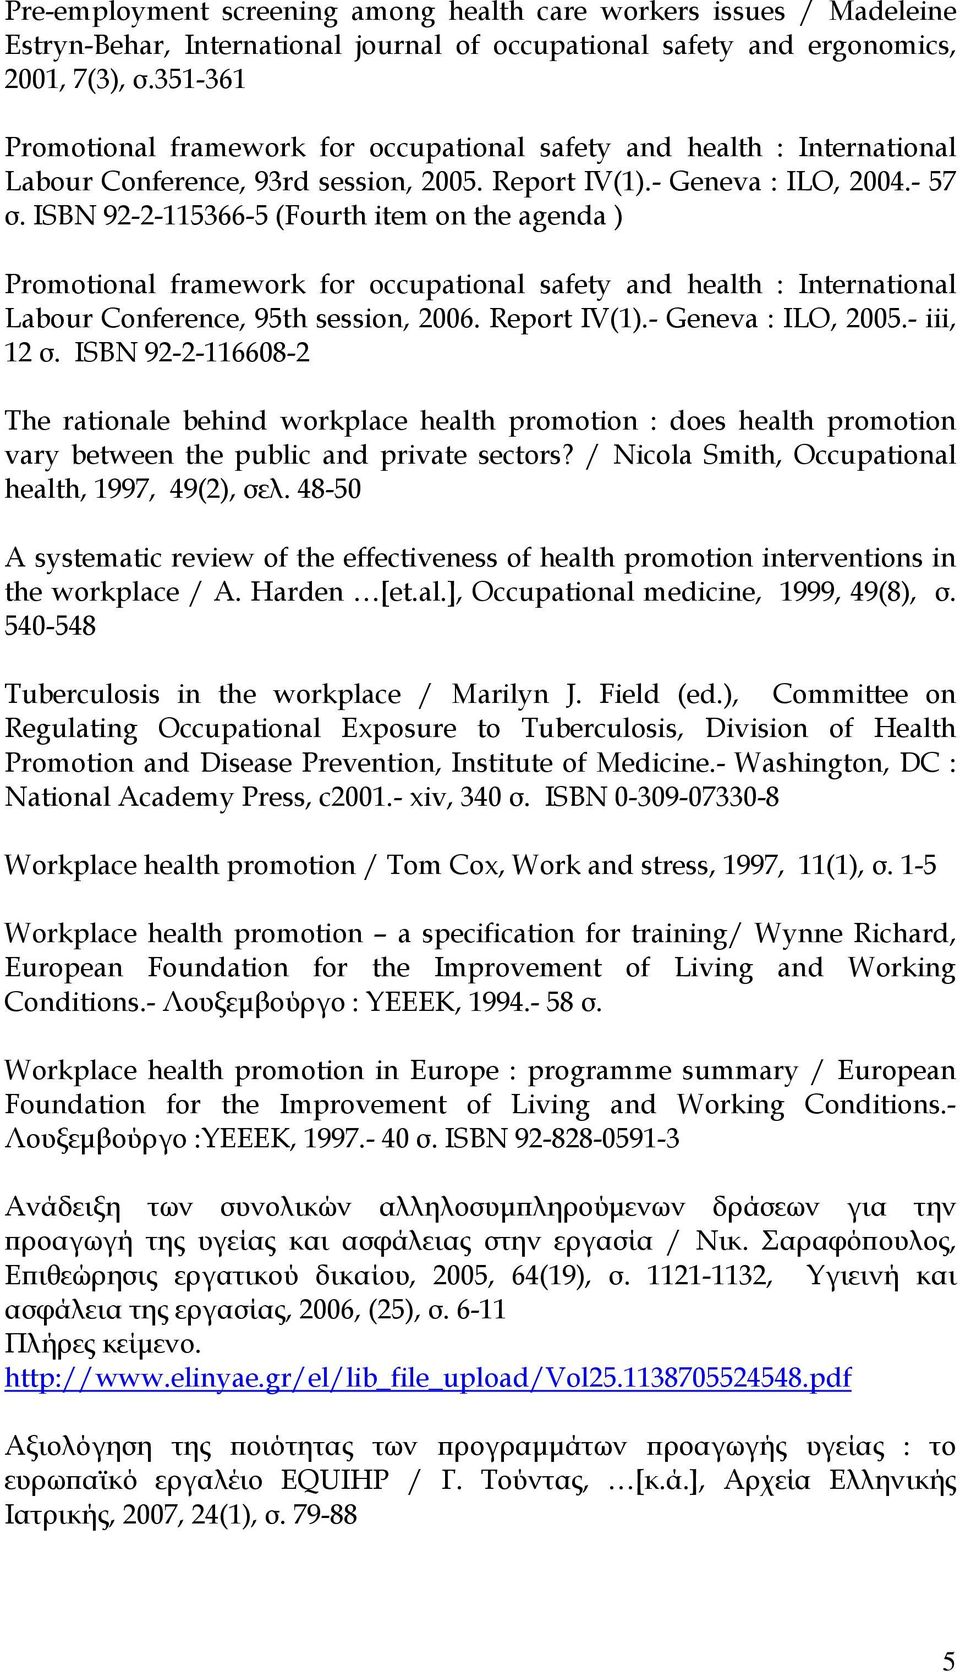 ISBN 92-2-115366-5 (Fourth item on the agenda ) Promotional framework for occupational safety and health : International Labour Conference, 95th session, 2006. Report IV(1).- Geneva : ILO, 2005.